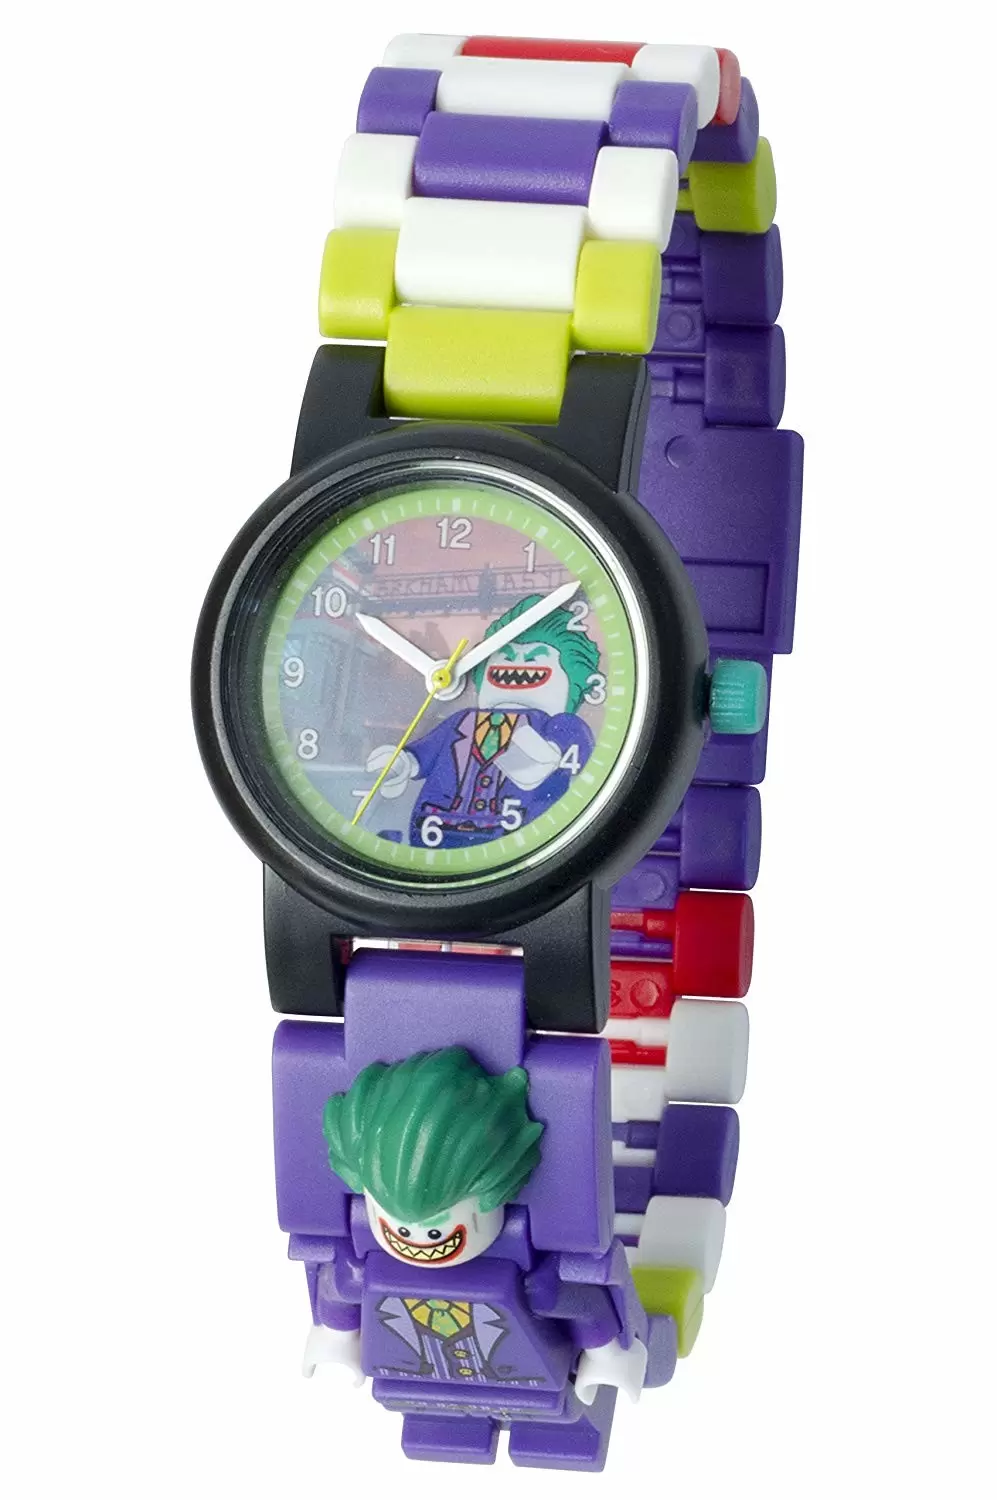 Stylish and Limited Edition Joker Watch on Sale